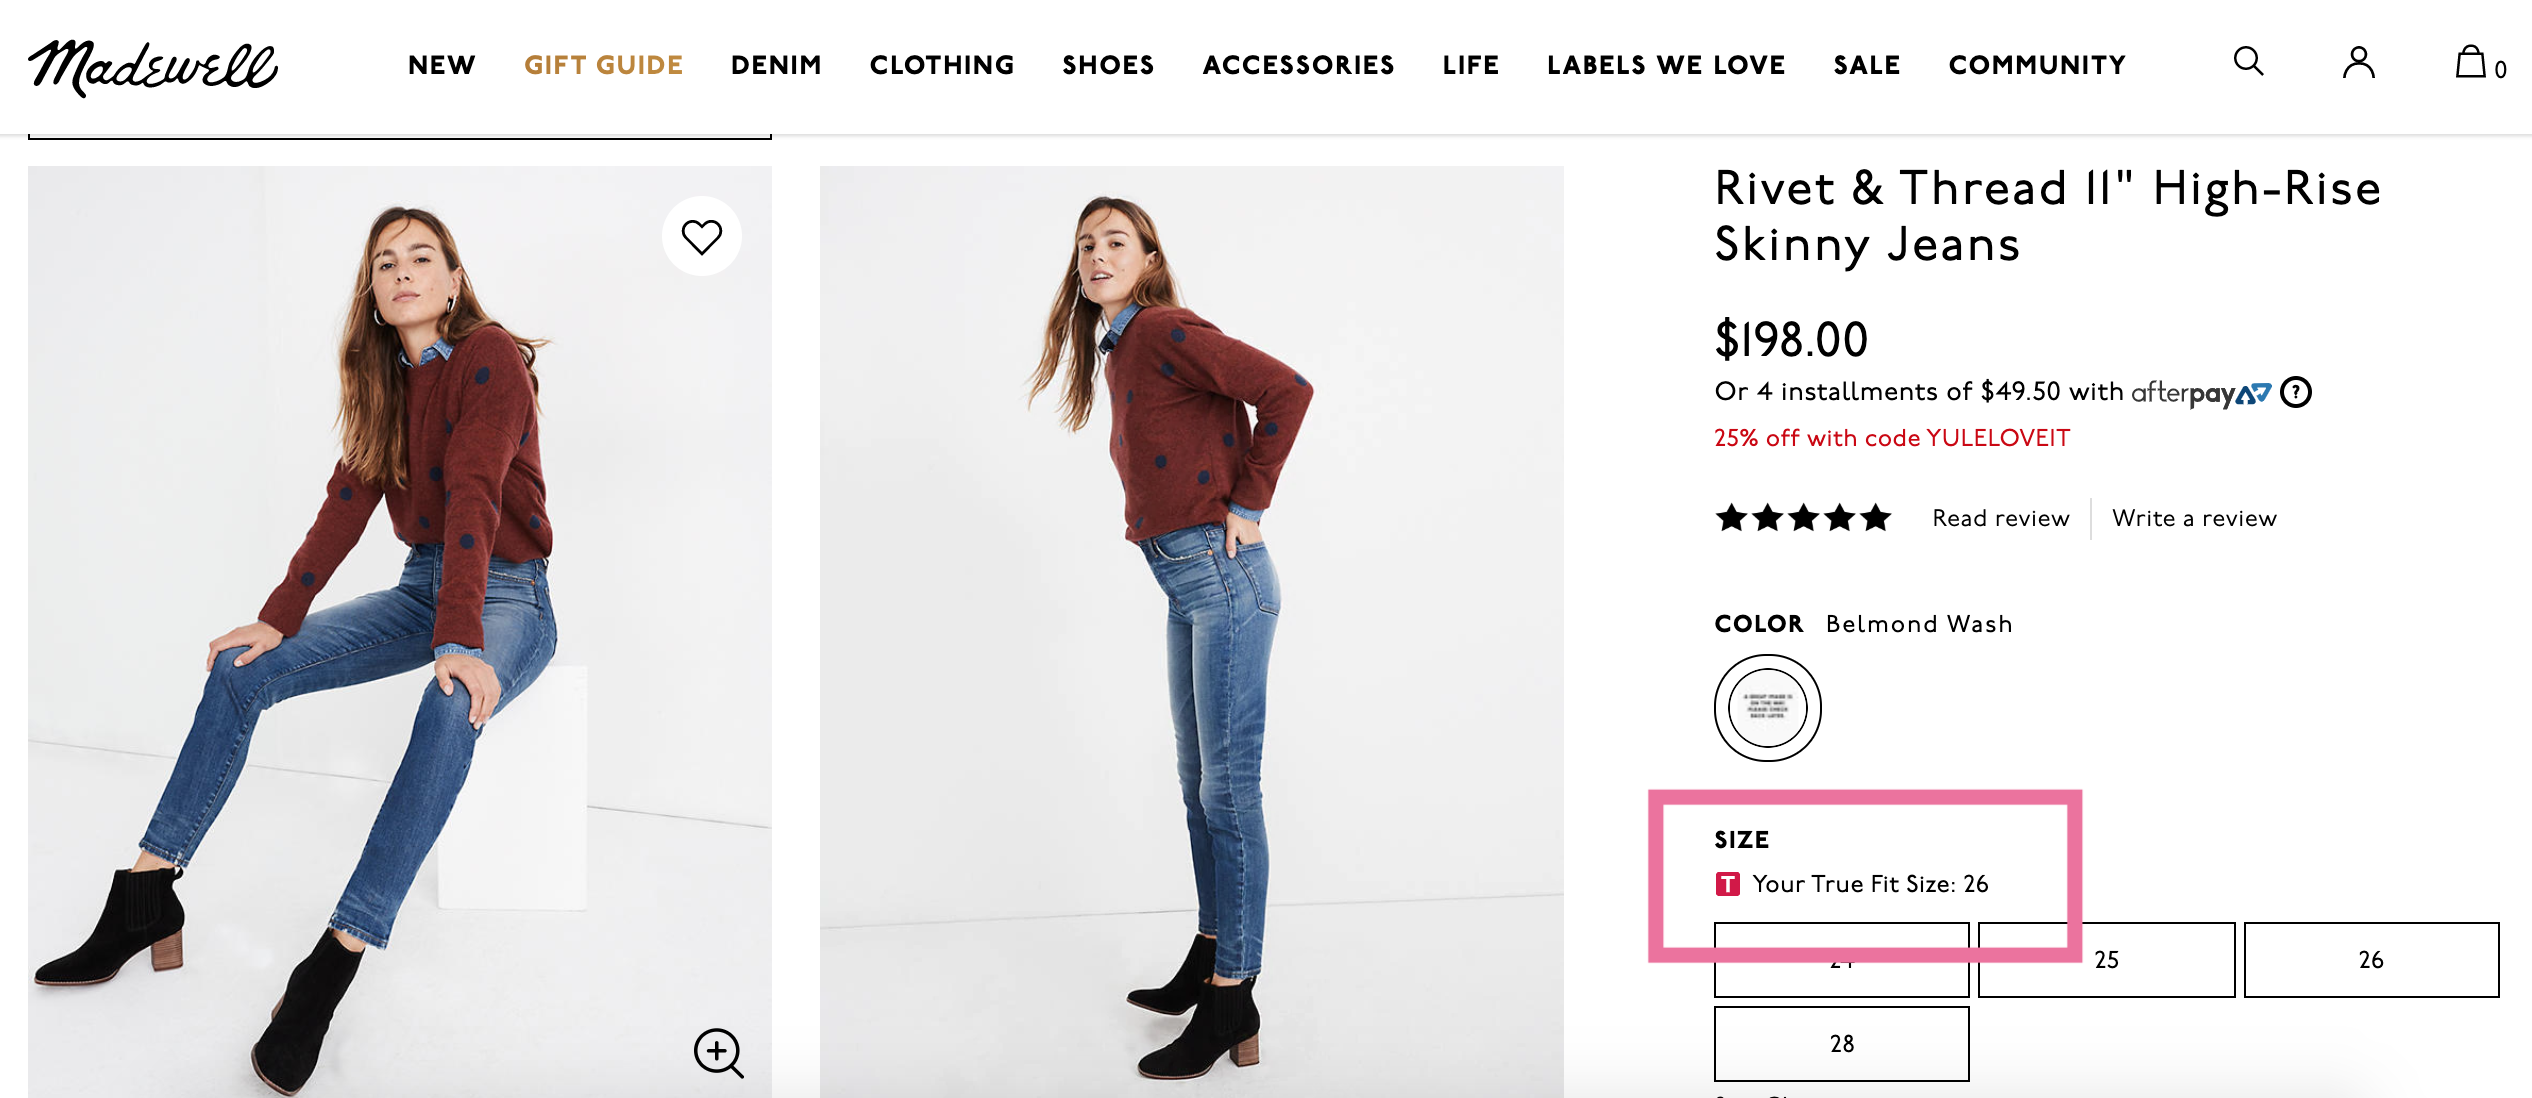 Madewell personalized shopping